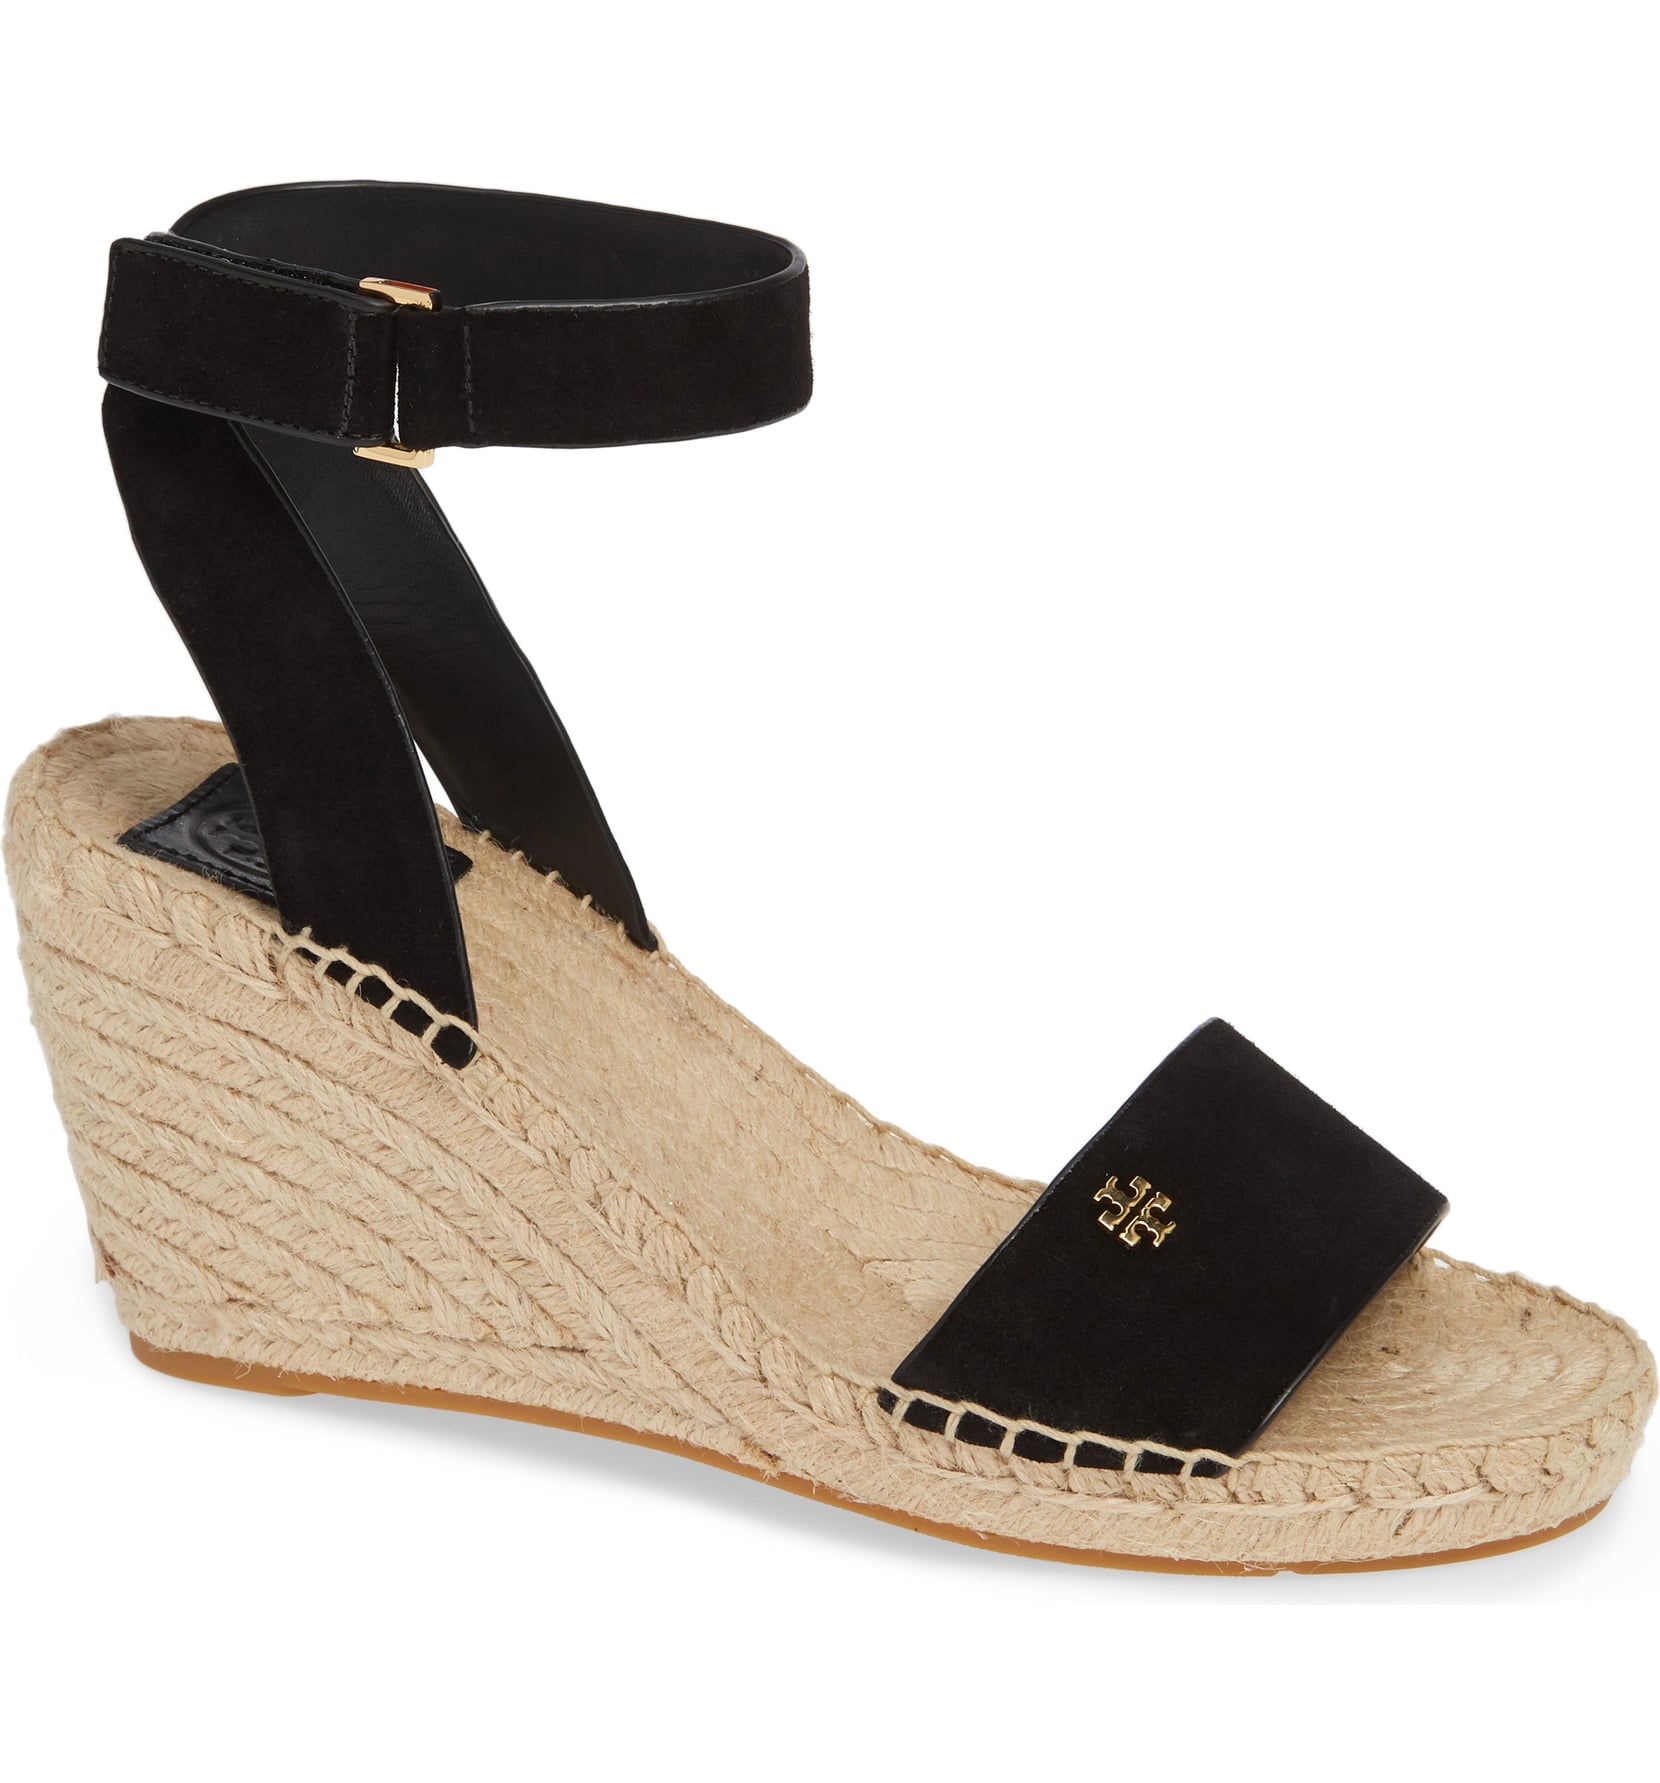 Tory Burch Bima 2 Espadrilles | Your Ultimate Guide: 260 Deals You Must See  From Our Favorite Memorial Day Sales | POPSUGAR Smart Living Photo 95